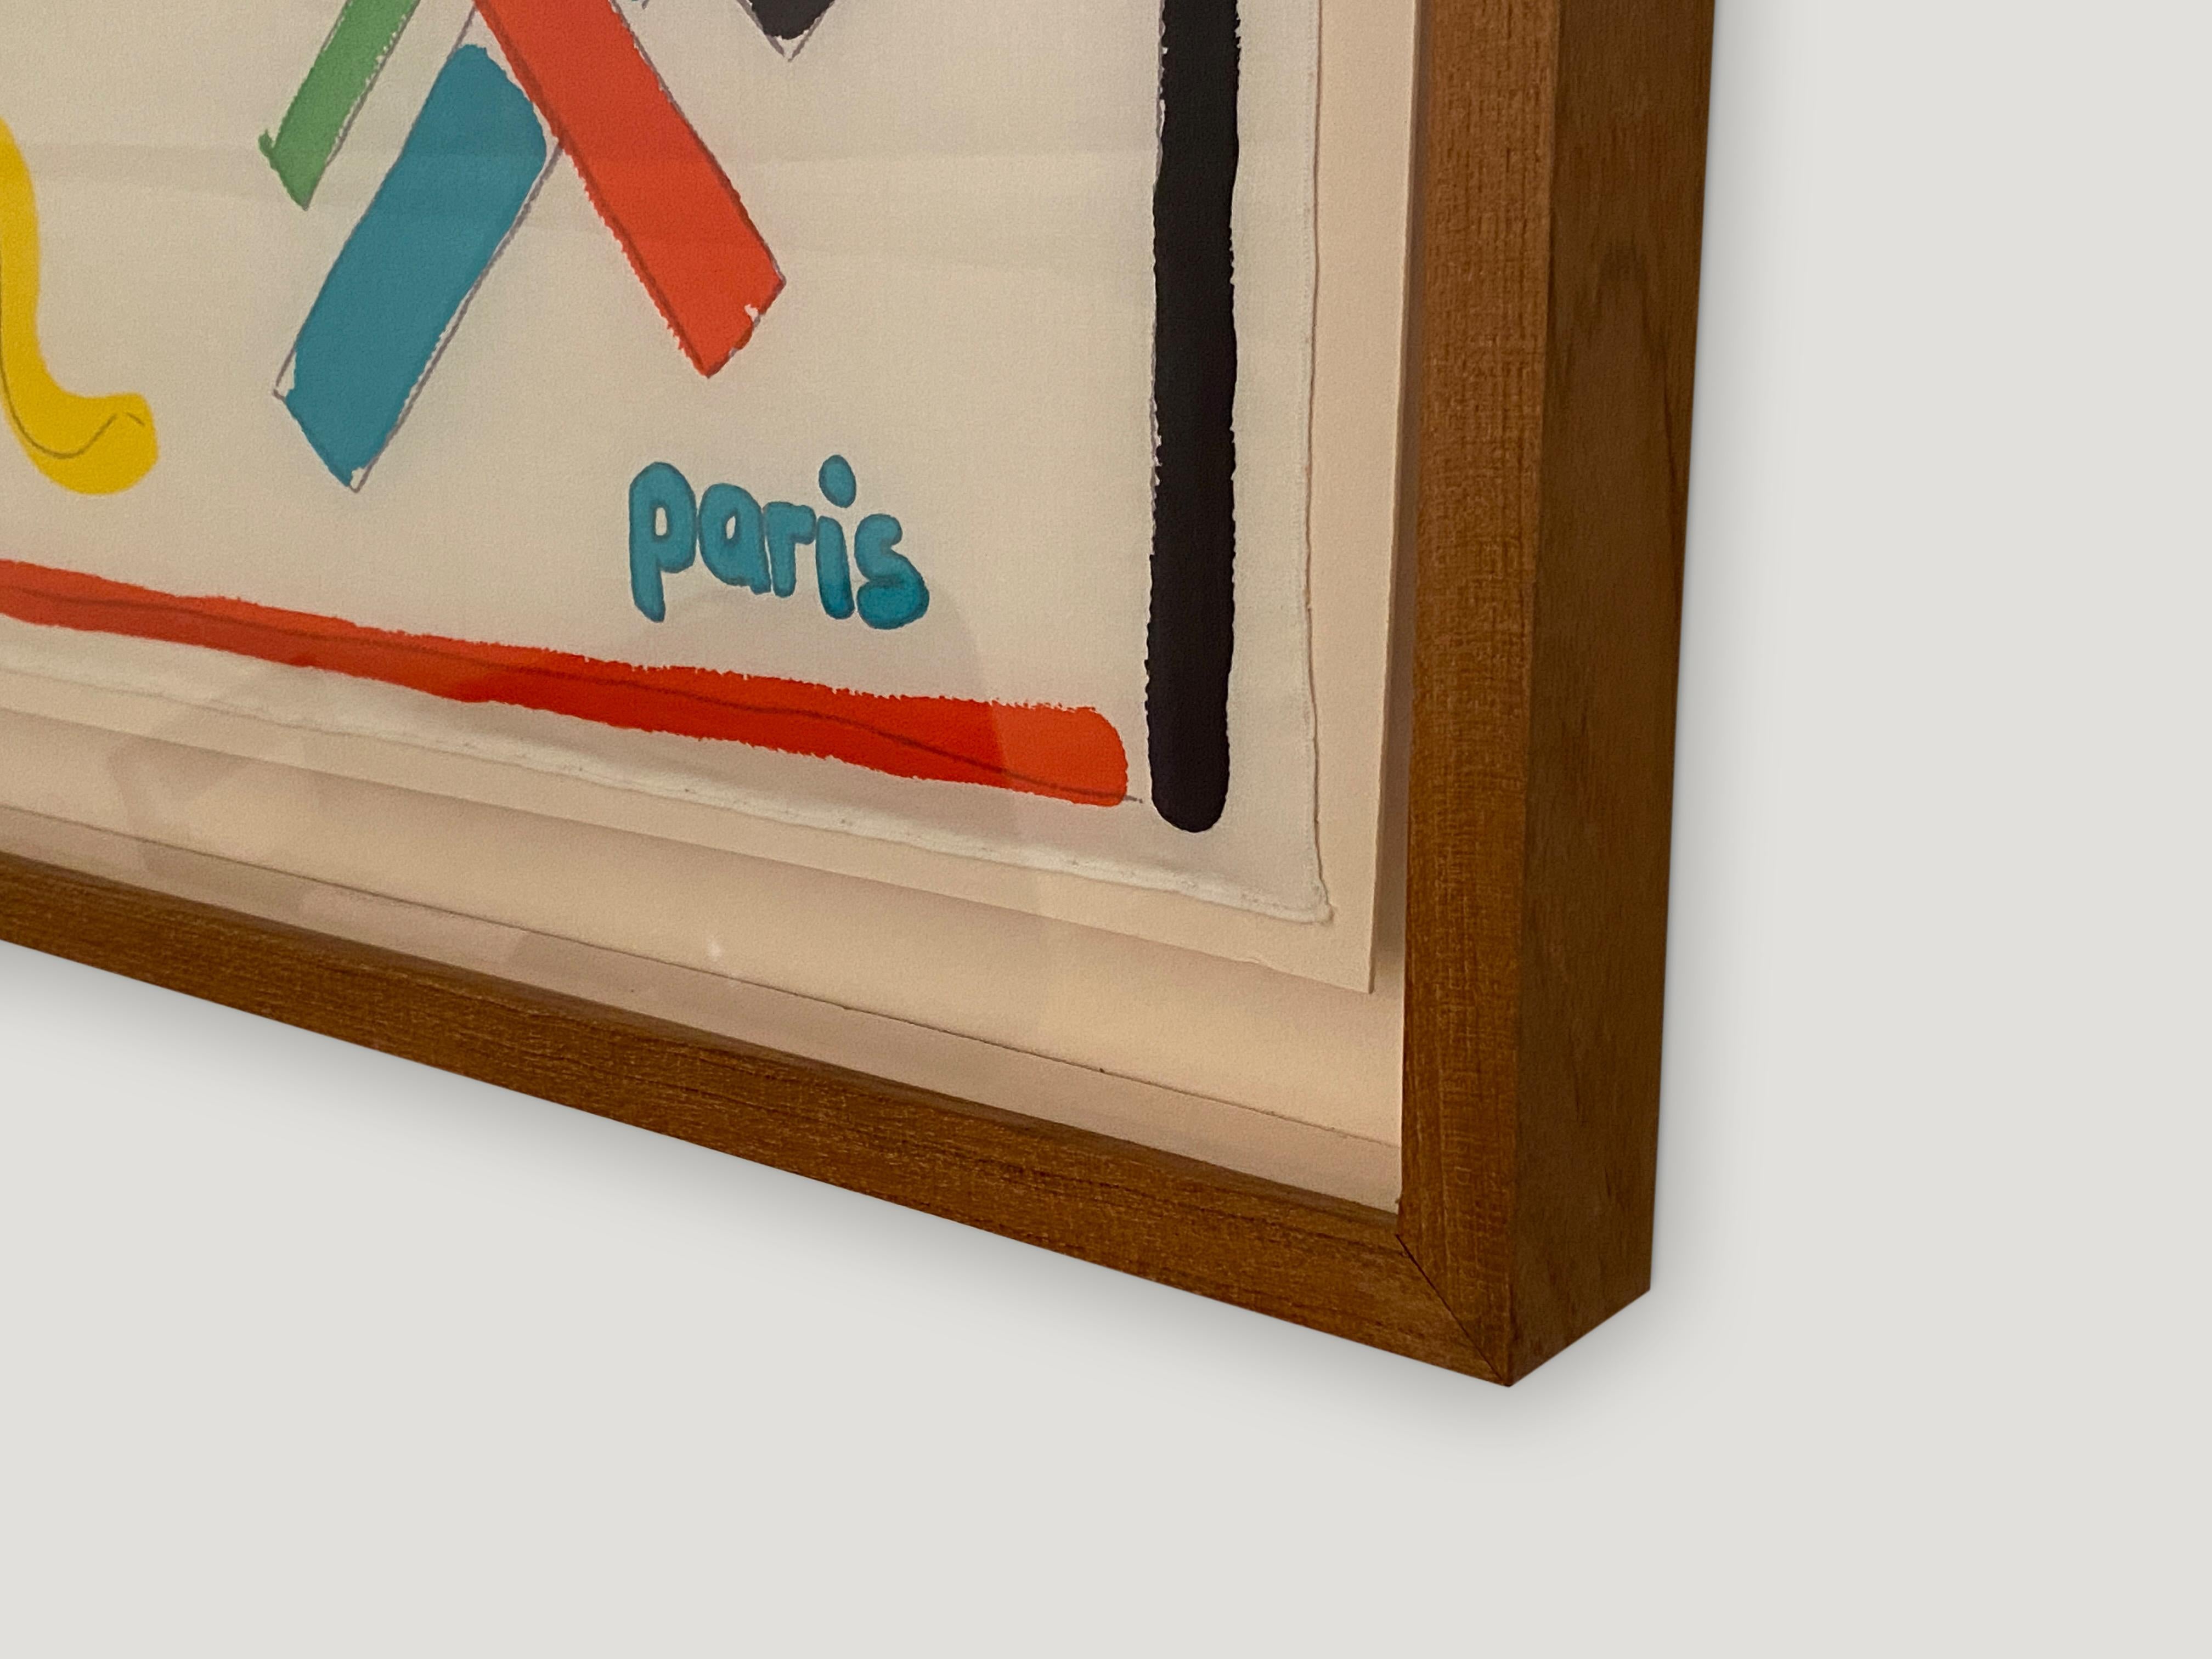 Rare, vintage Courrèges silk scarf in excellent condition found in Paris, France. Features bold pop-art style colors and shapes with the Courrèges logo. Set in a modern natural teak box frame.

Andrianna Shamaris. The Leader In Modern Organic